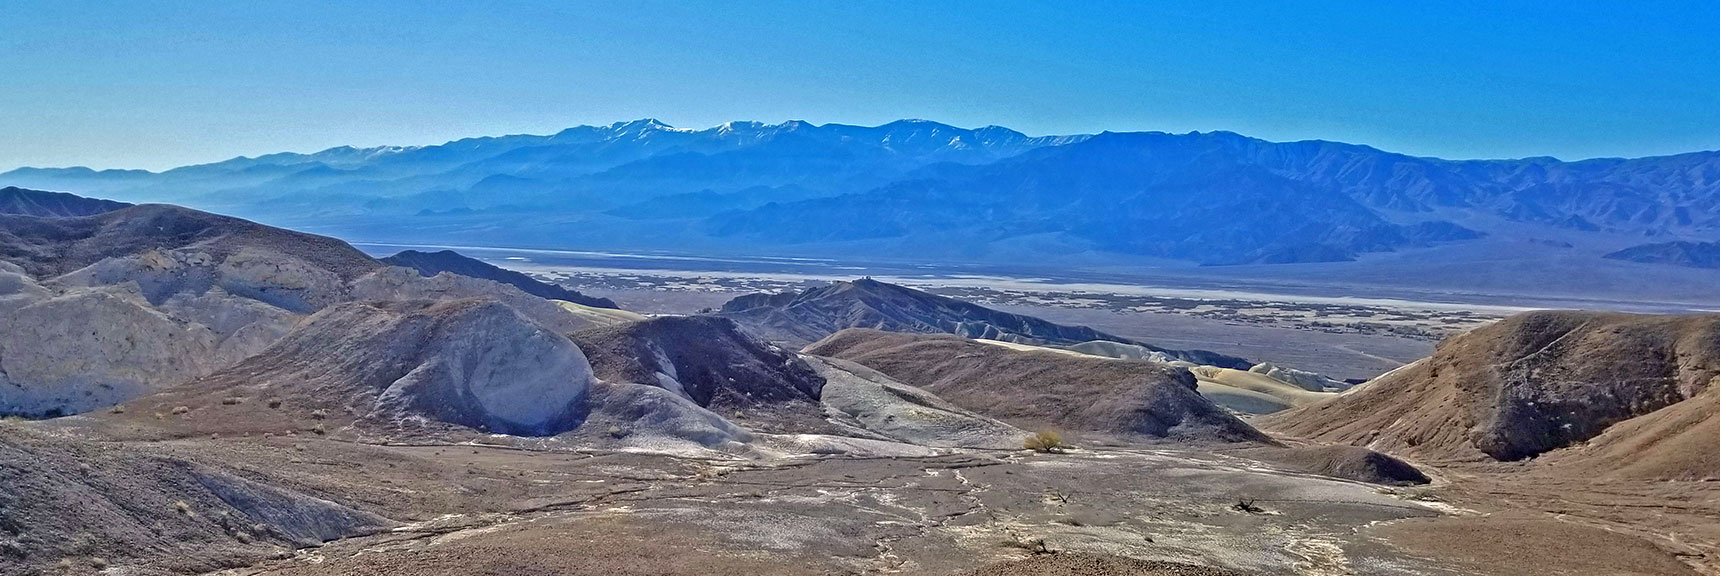 Tea House with Telescope, Bennett, Rodgers, Wildrose Peaks and Aguereberry Point from Table Rock Summit. | Tea House & Table Rock Circuit | Furnace Creek | Death Valley National Park, California